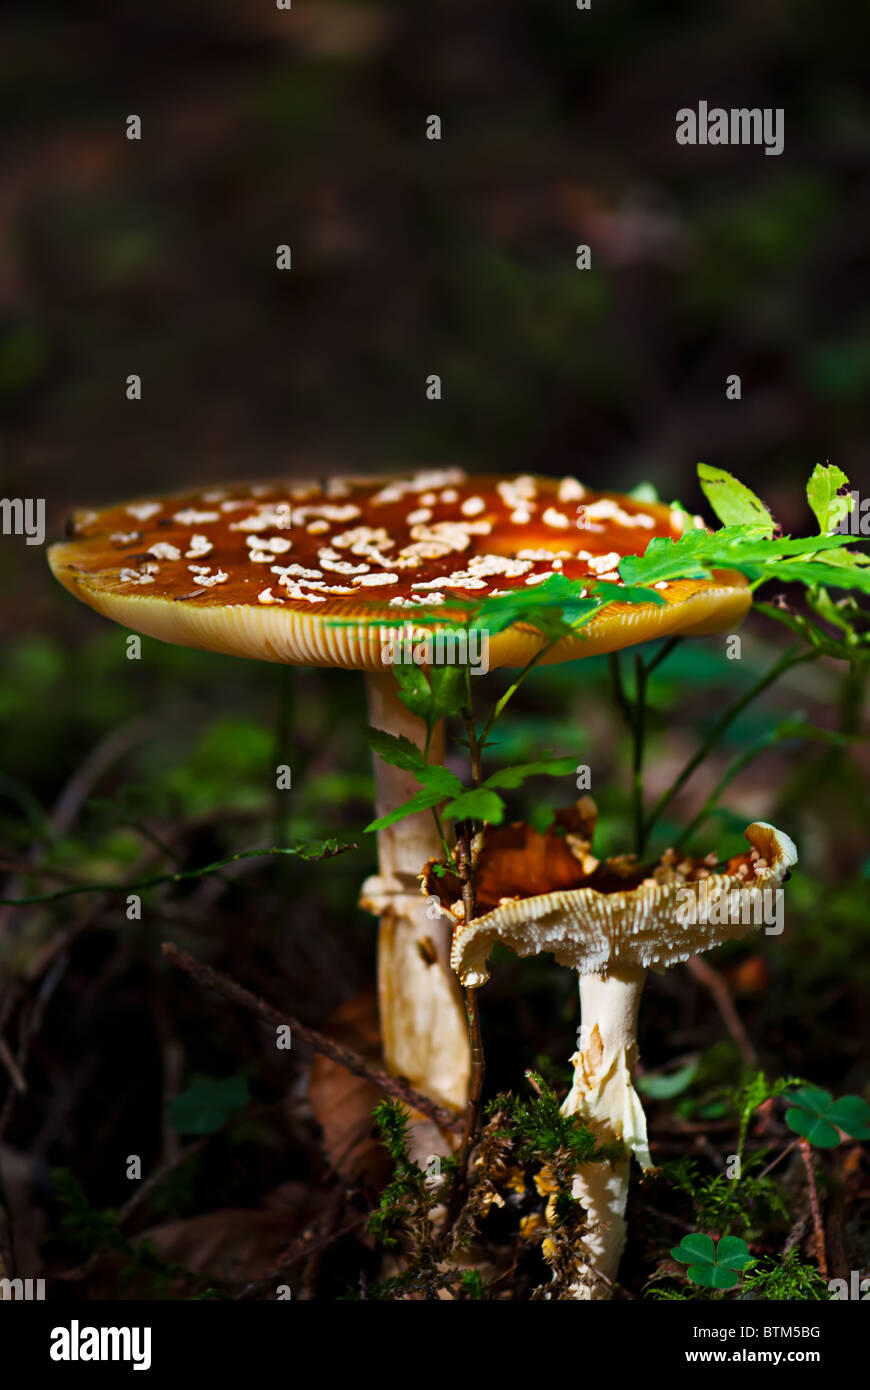 Fly agarick mushrooms in forest Stock Photo